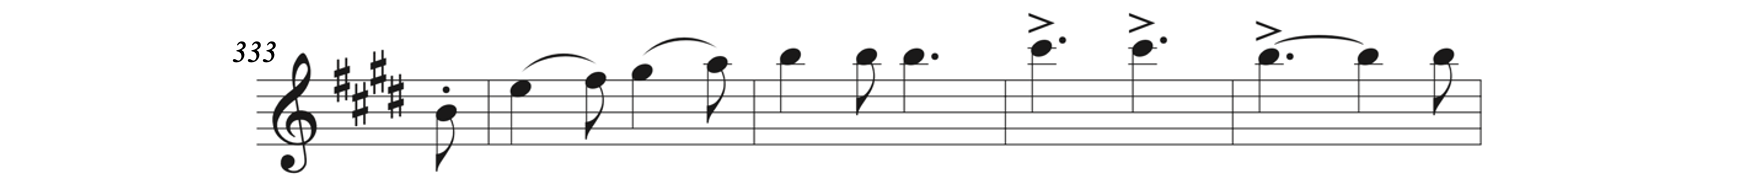 Same melody from Smetana's Má Vlast in E major. The key signature is that from E major.